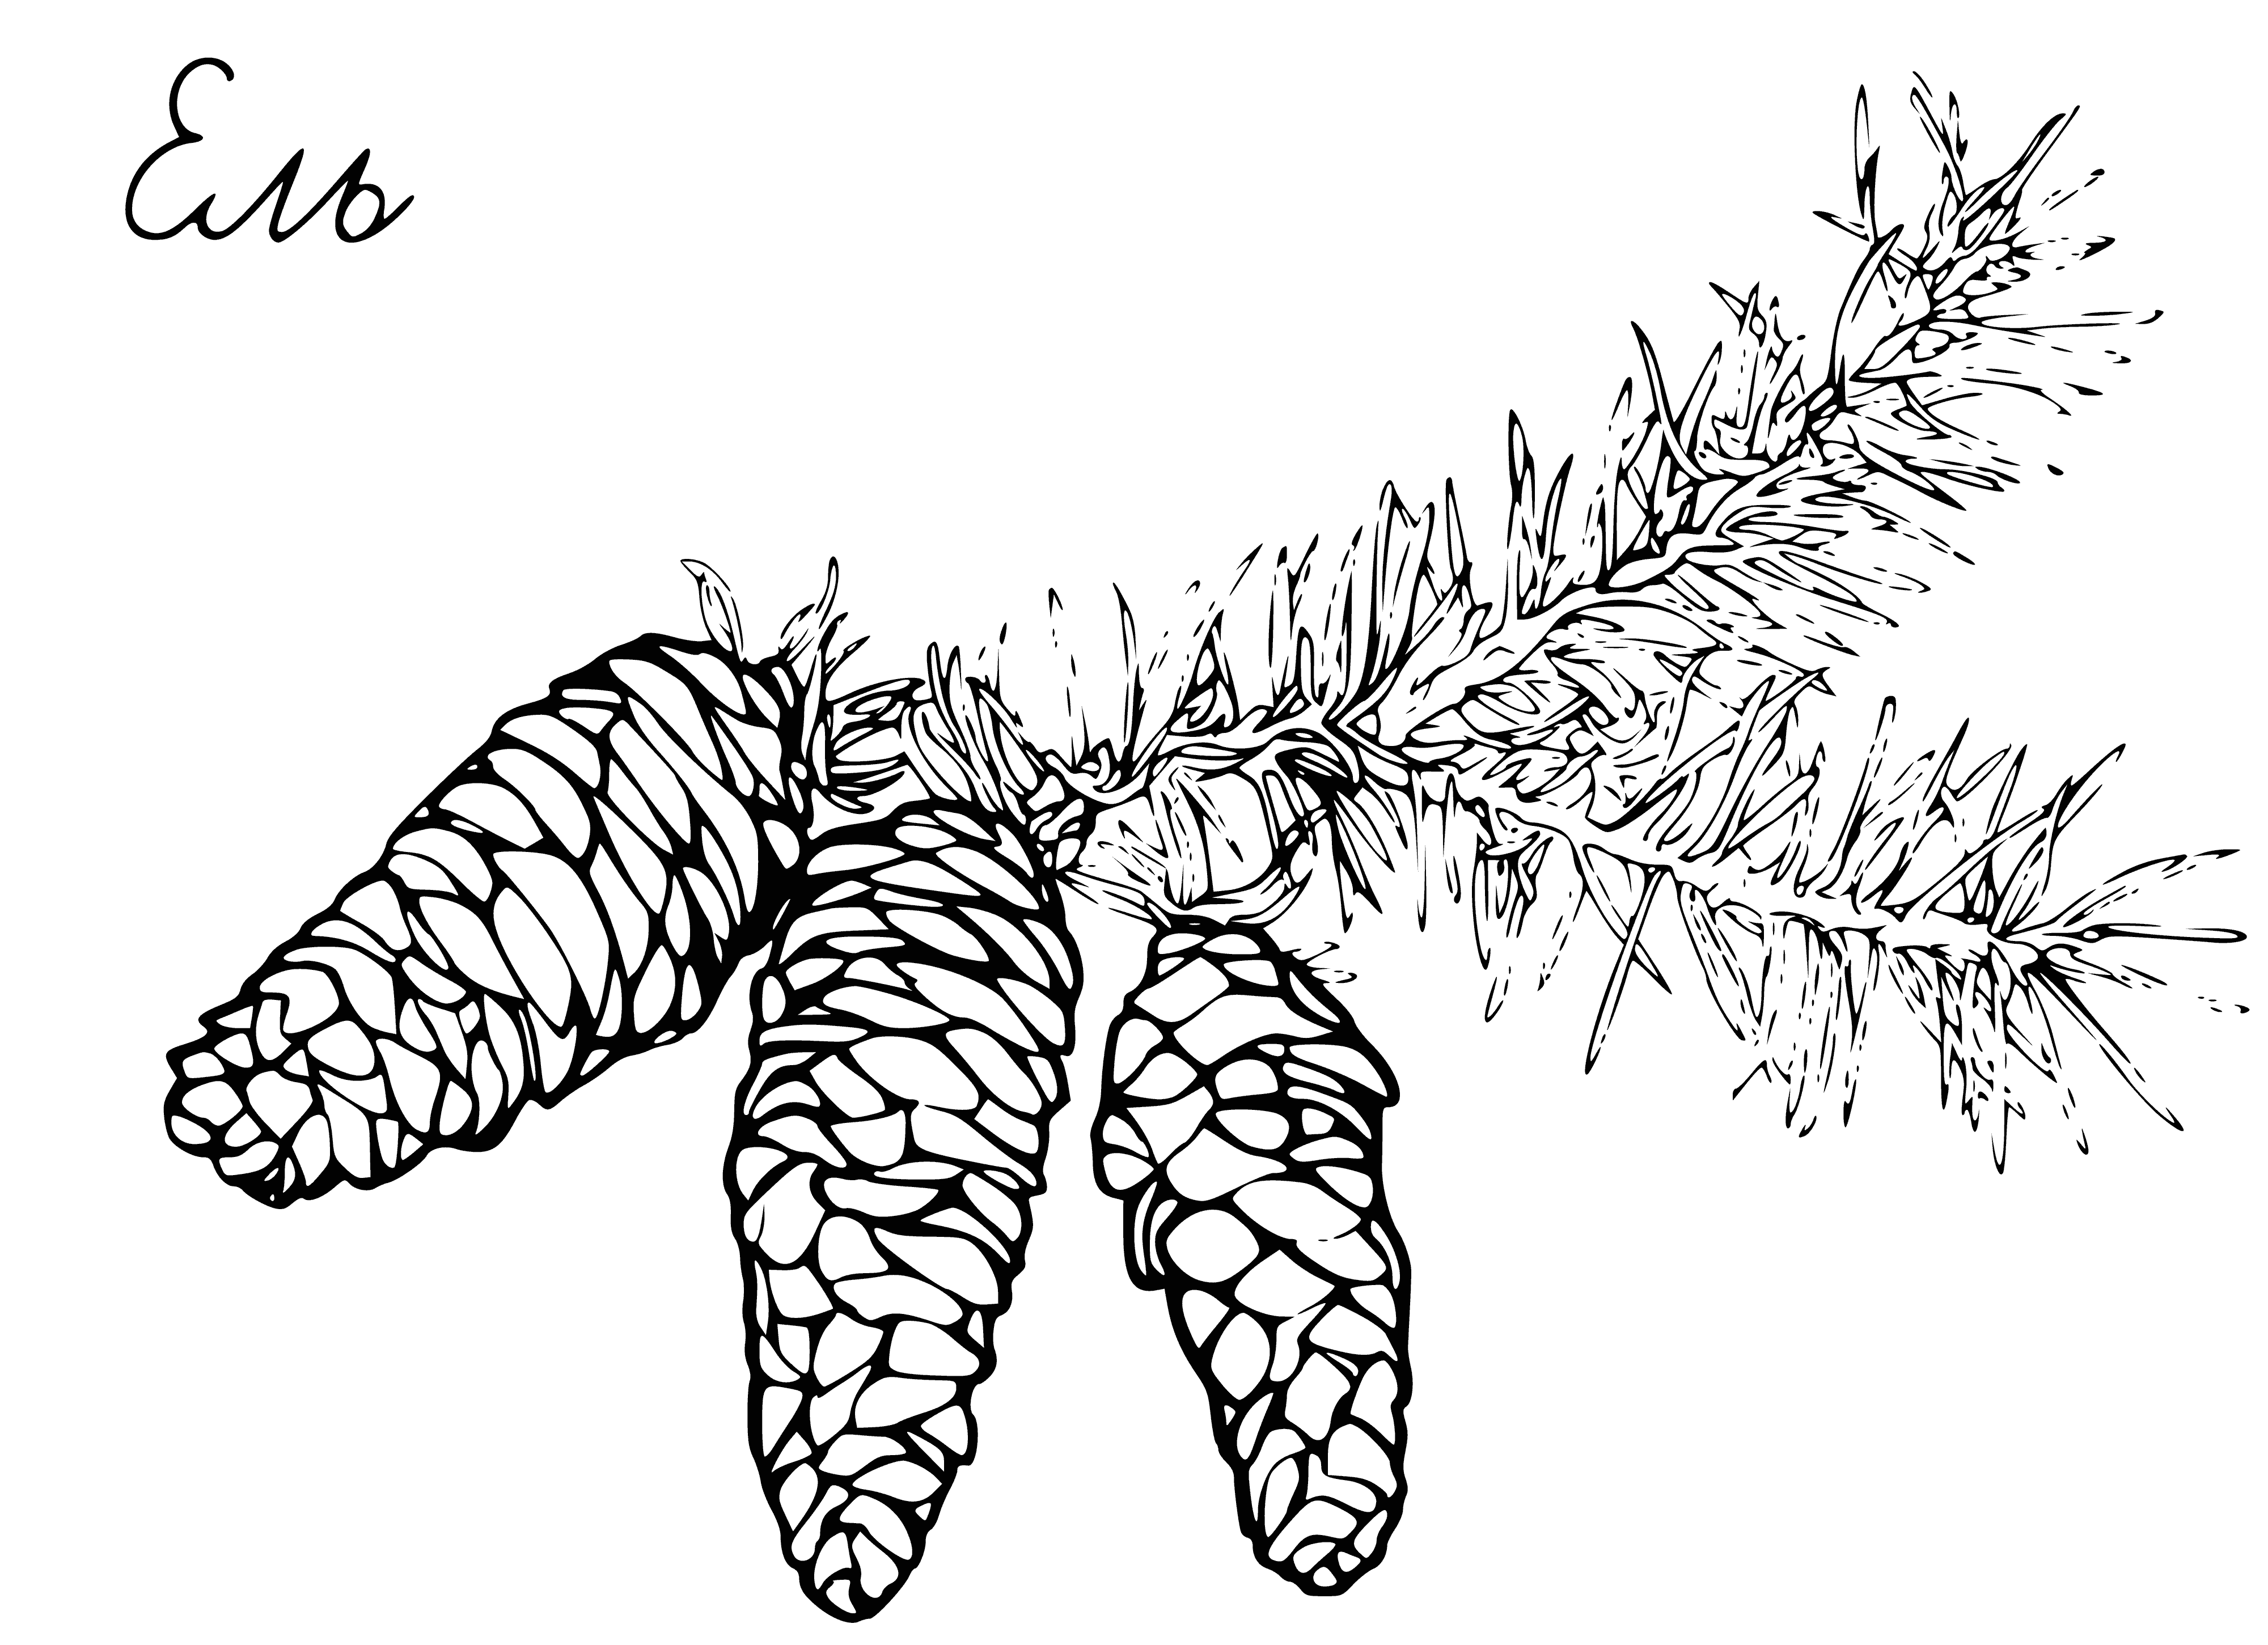 coloring page: A spruce branch with green needles and pointy brown cones hangs down. #nature